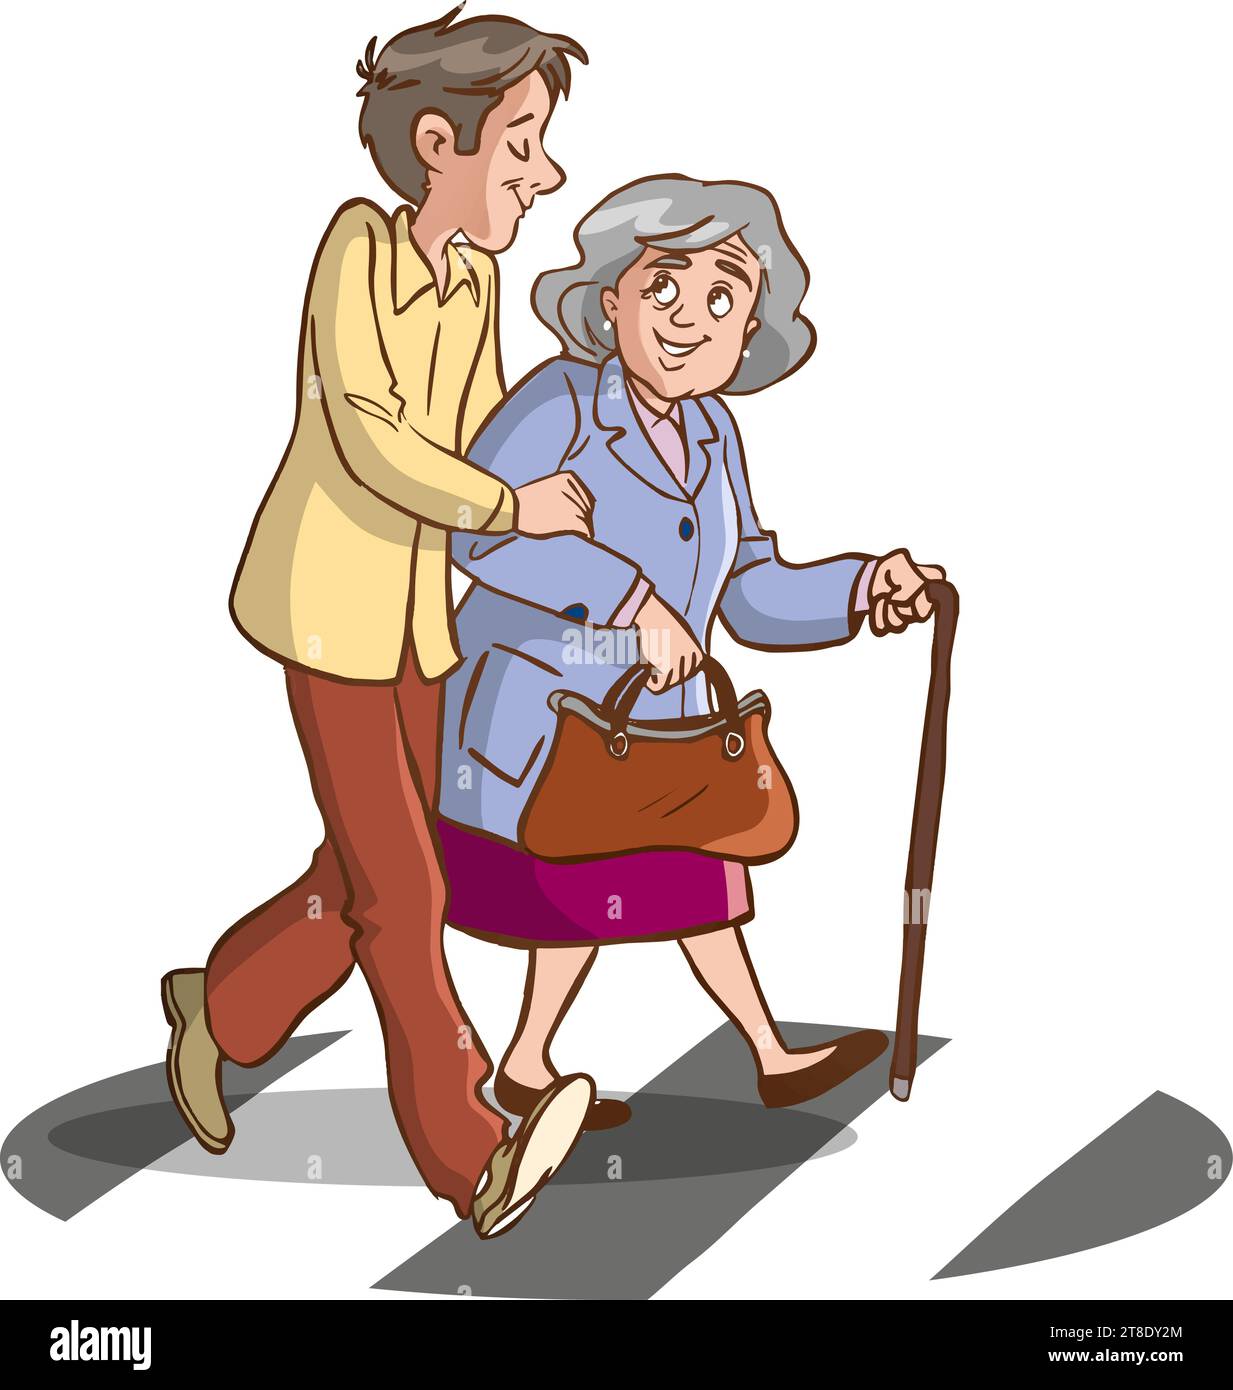 vector illustration of young man helping old woman at crosswalk Stock Vector